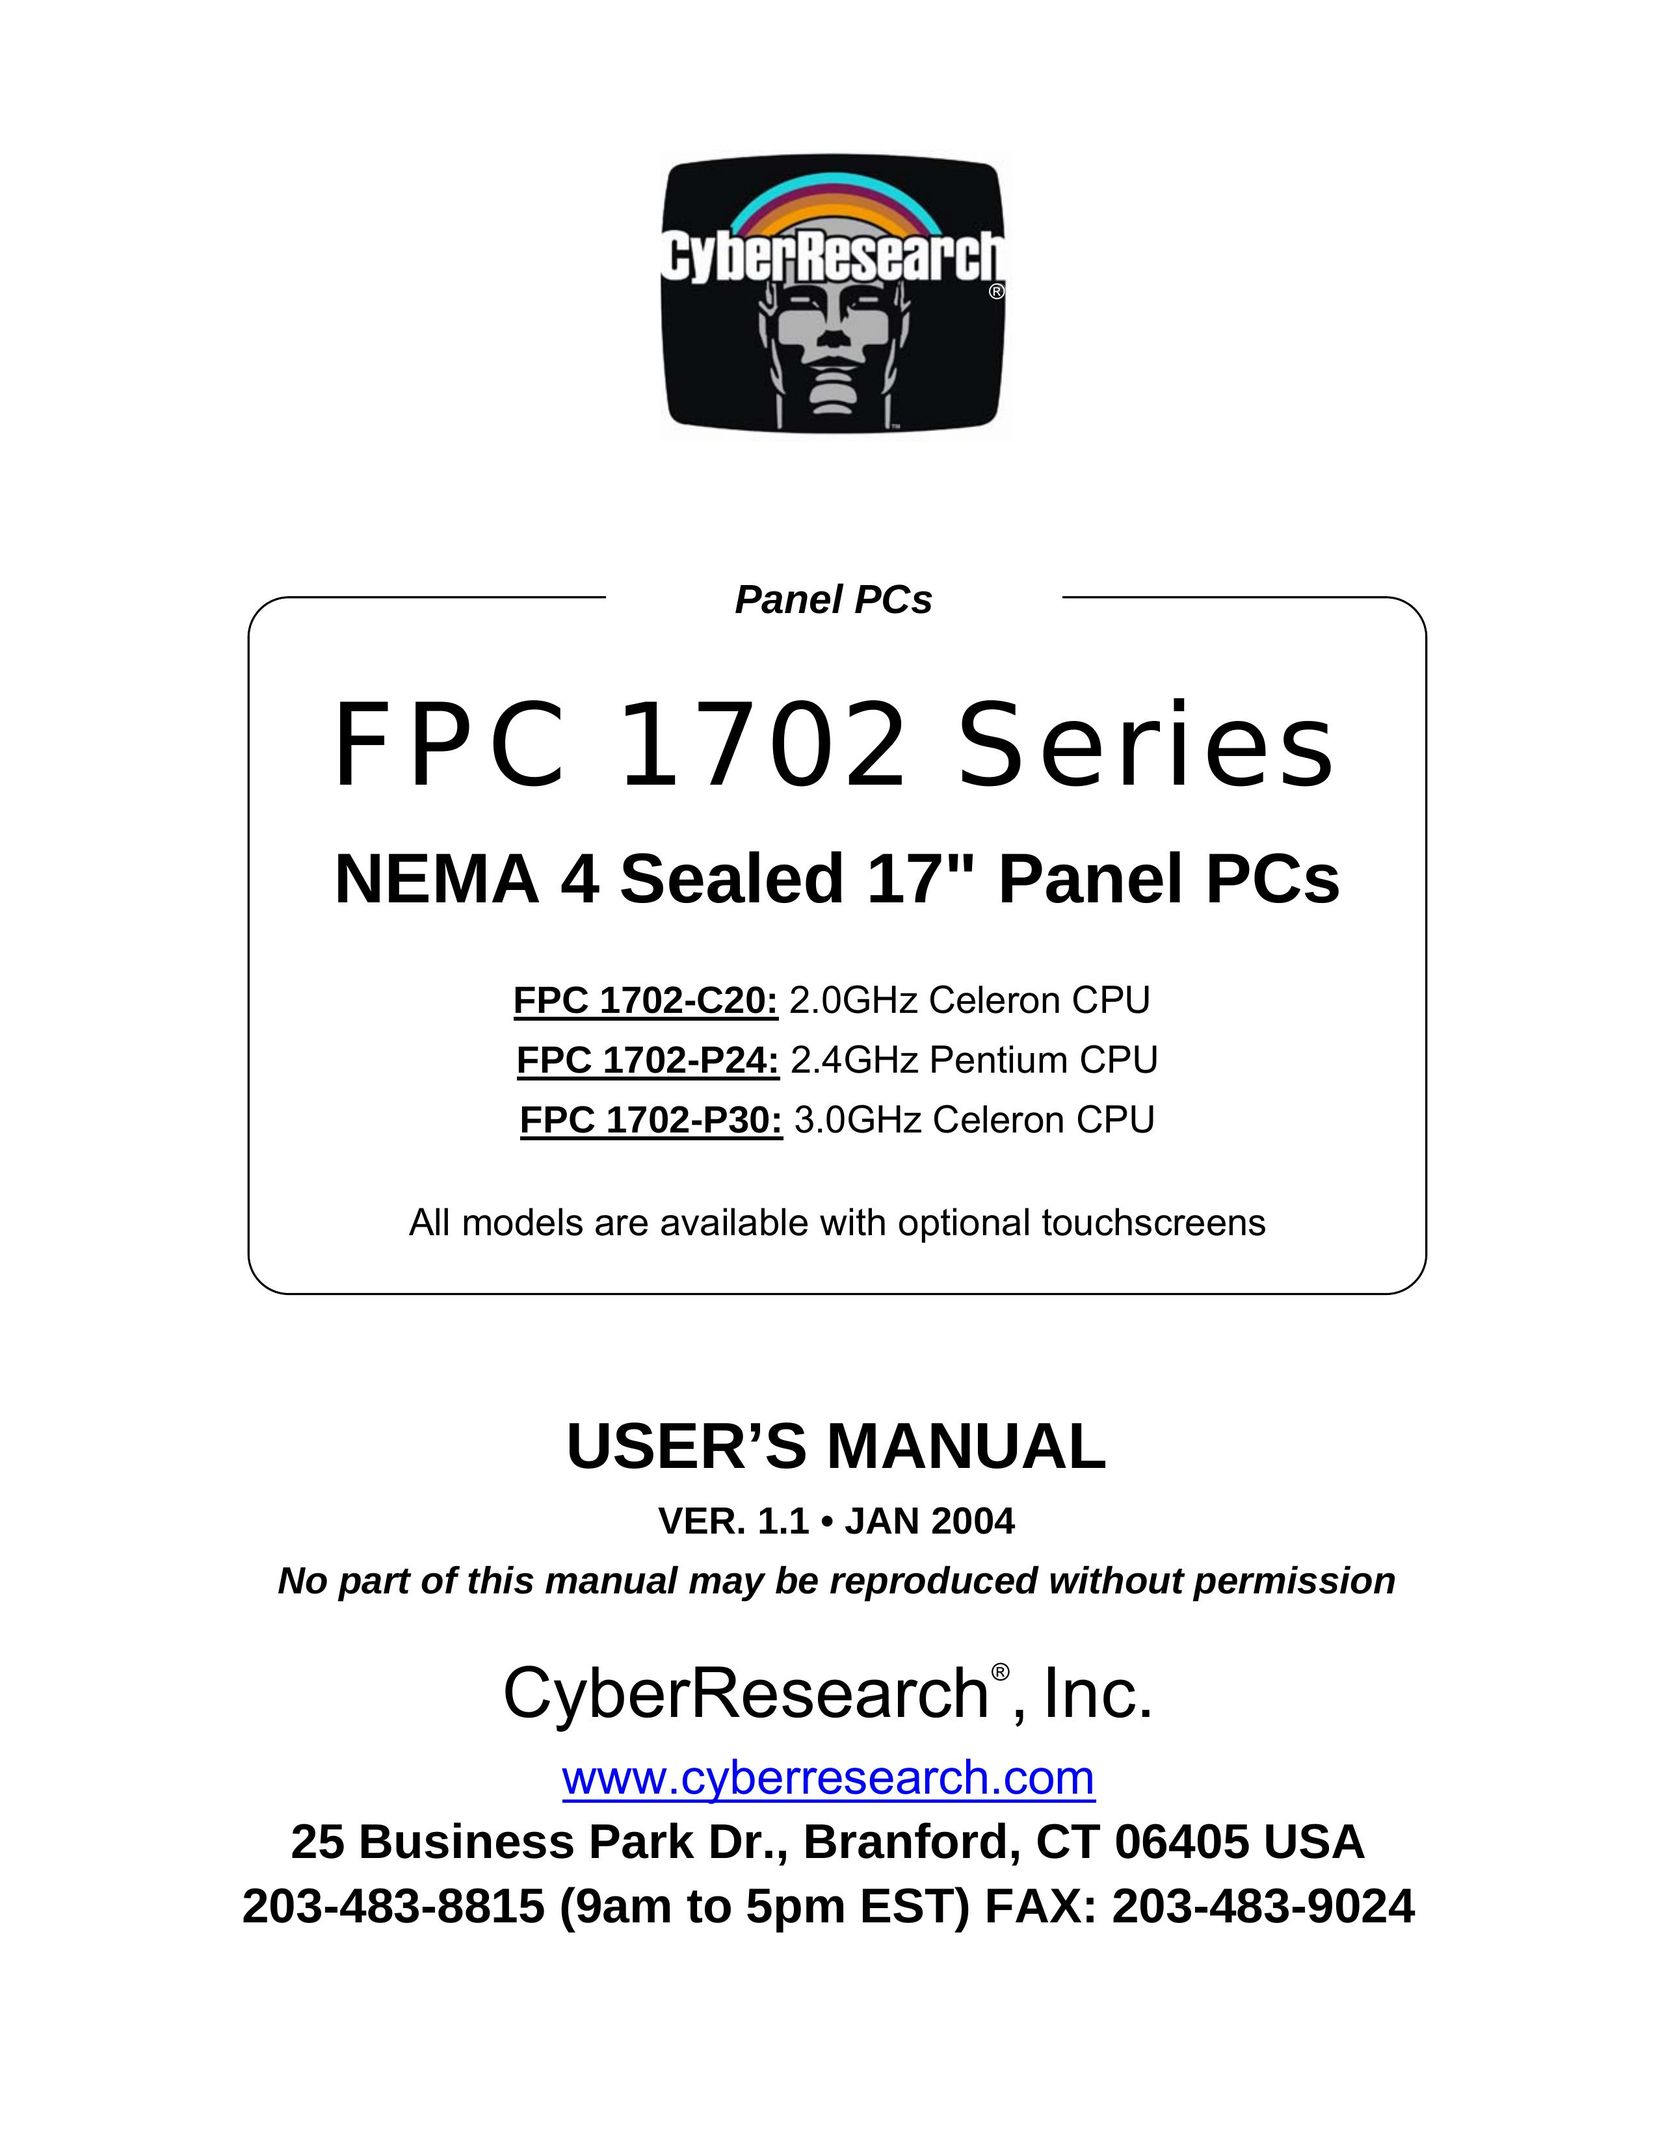 CyberResearch FPC 1702-P30 Personal Computer User Manual